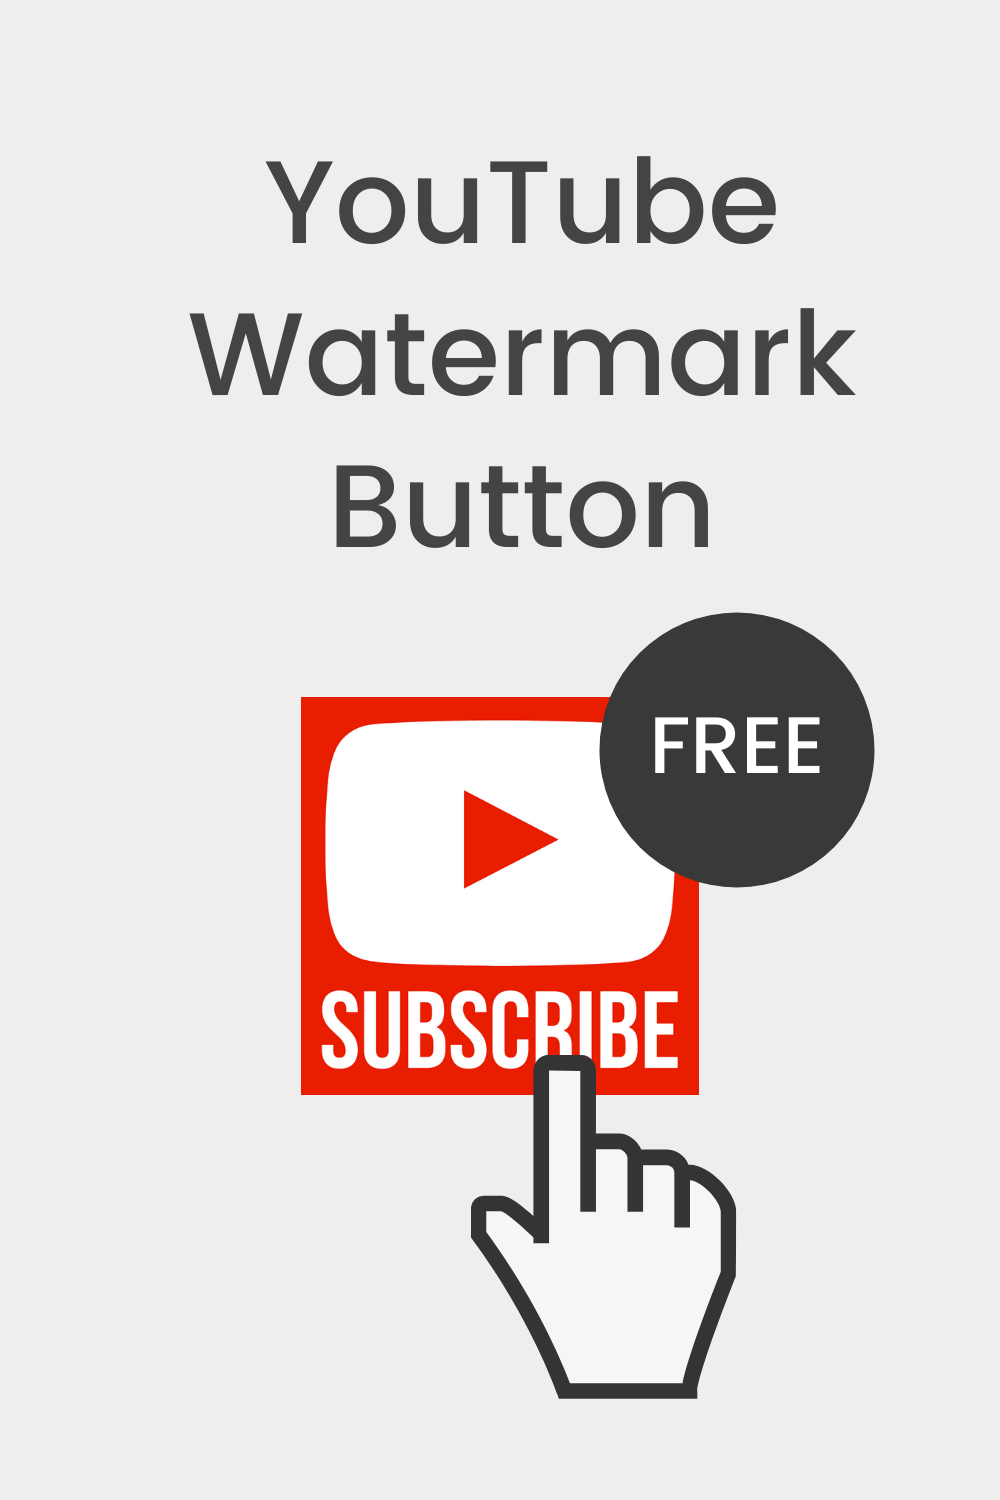 Youtube downloader without watermark